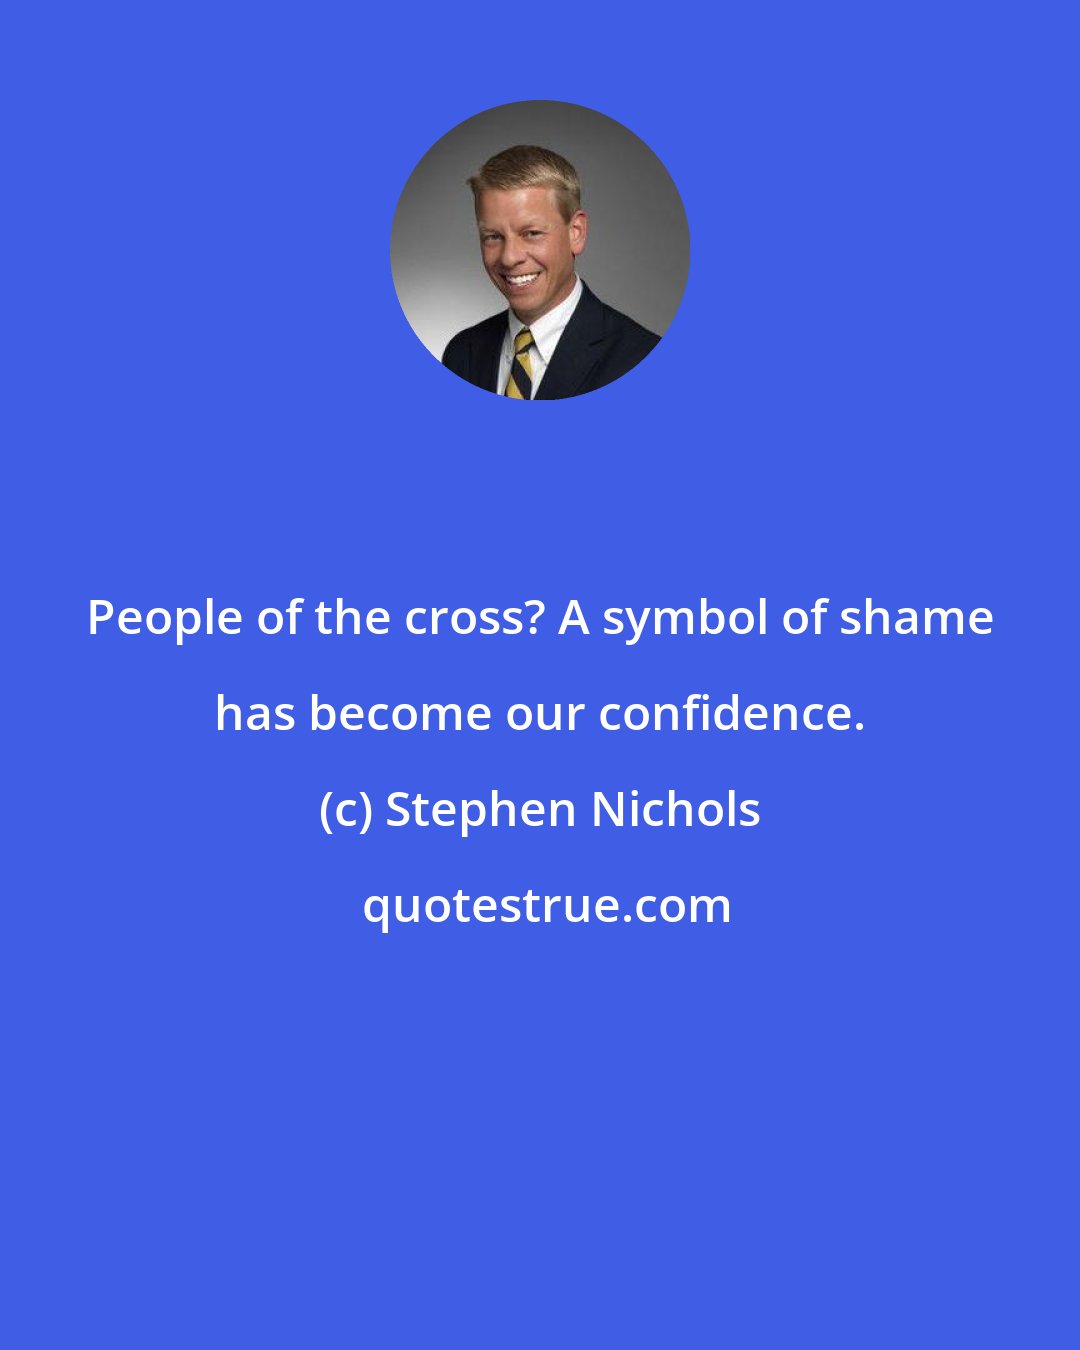 Stephen Nichols: People of the cross? A symbol of shame has become our confidence.